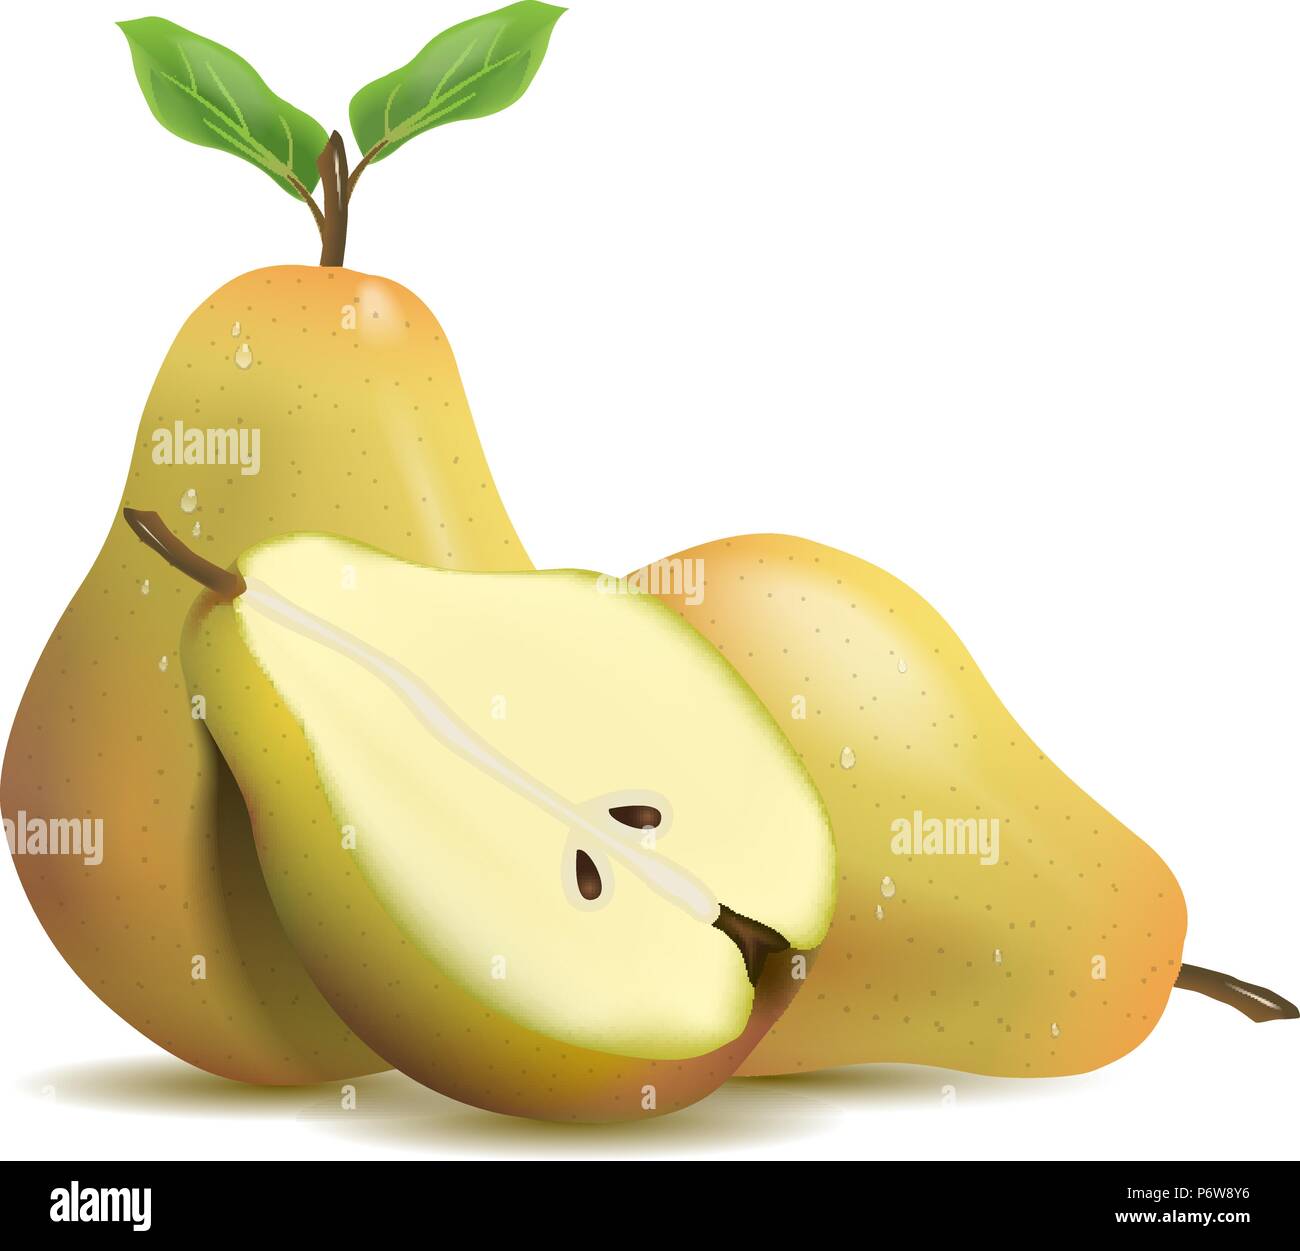 Realistic illustration pear isolated on white background Stock Vector